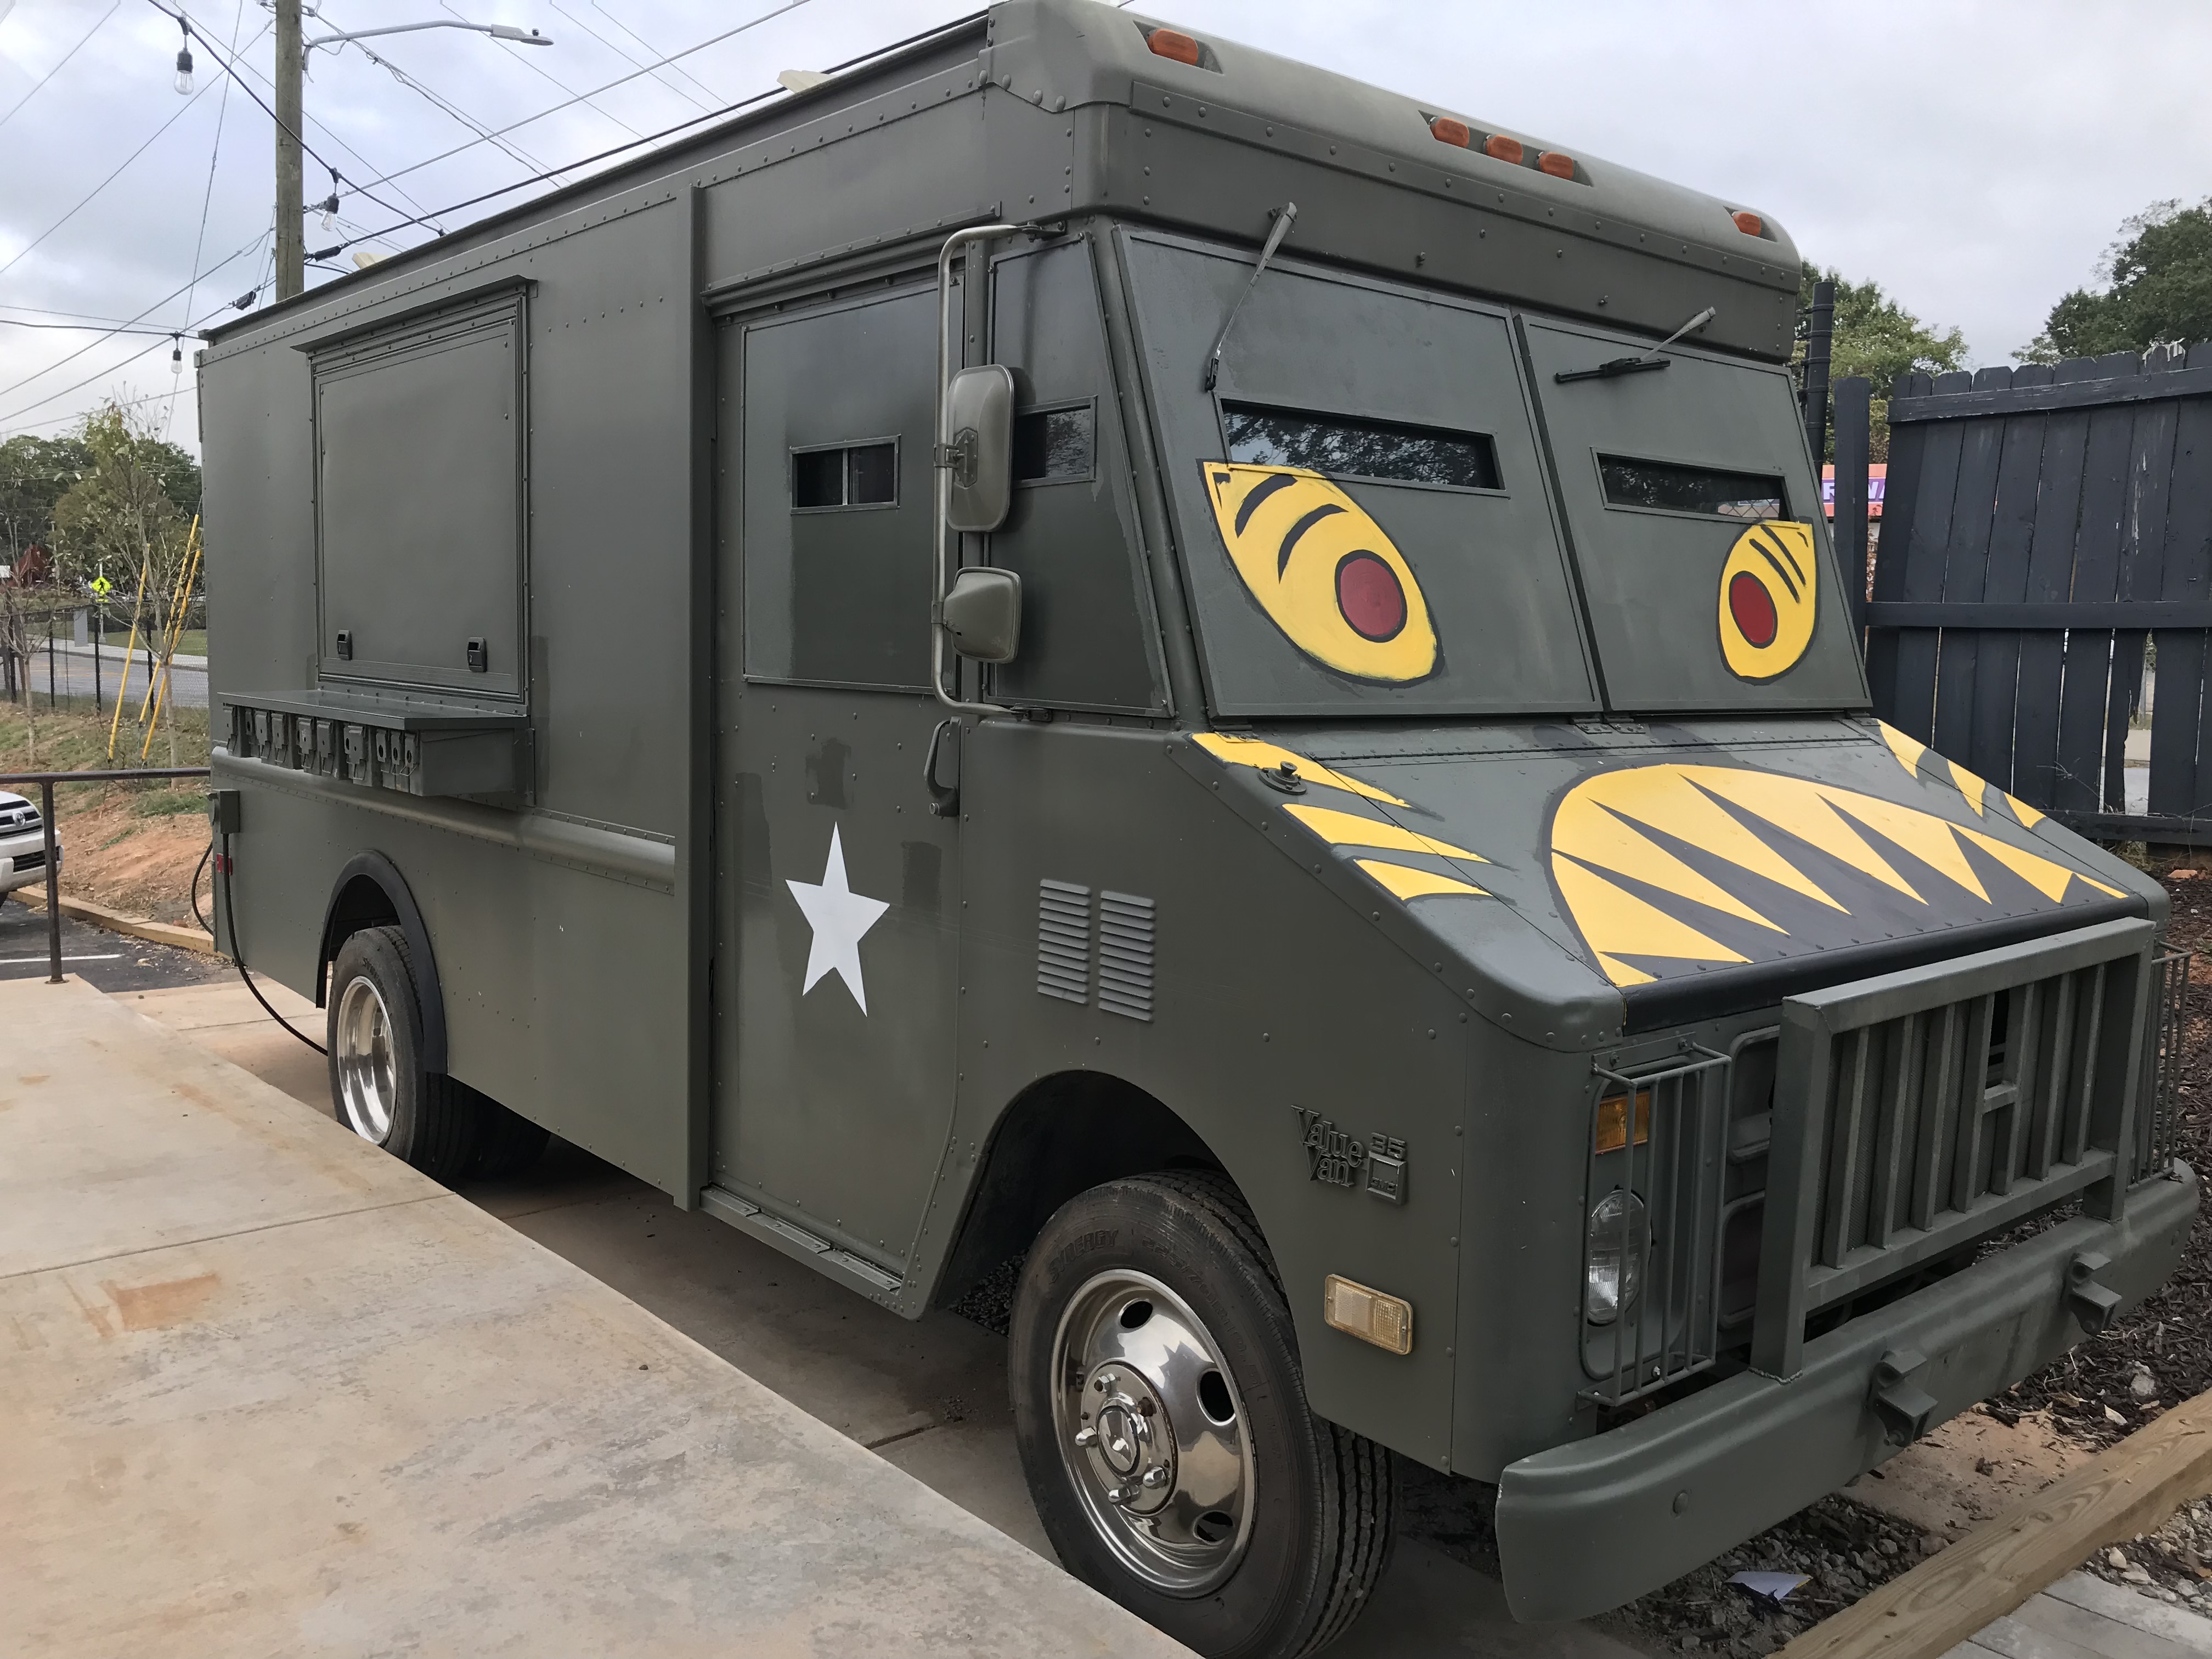 The army green Gaja Korean food truck with painted yellow eyes and teeth parked next to the patio